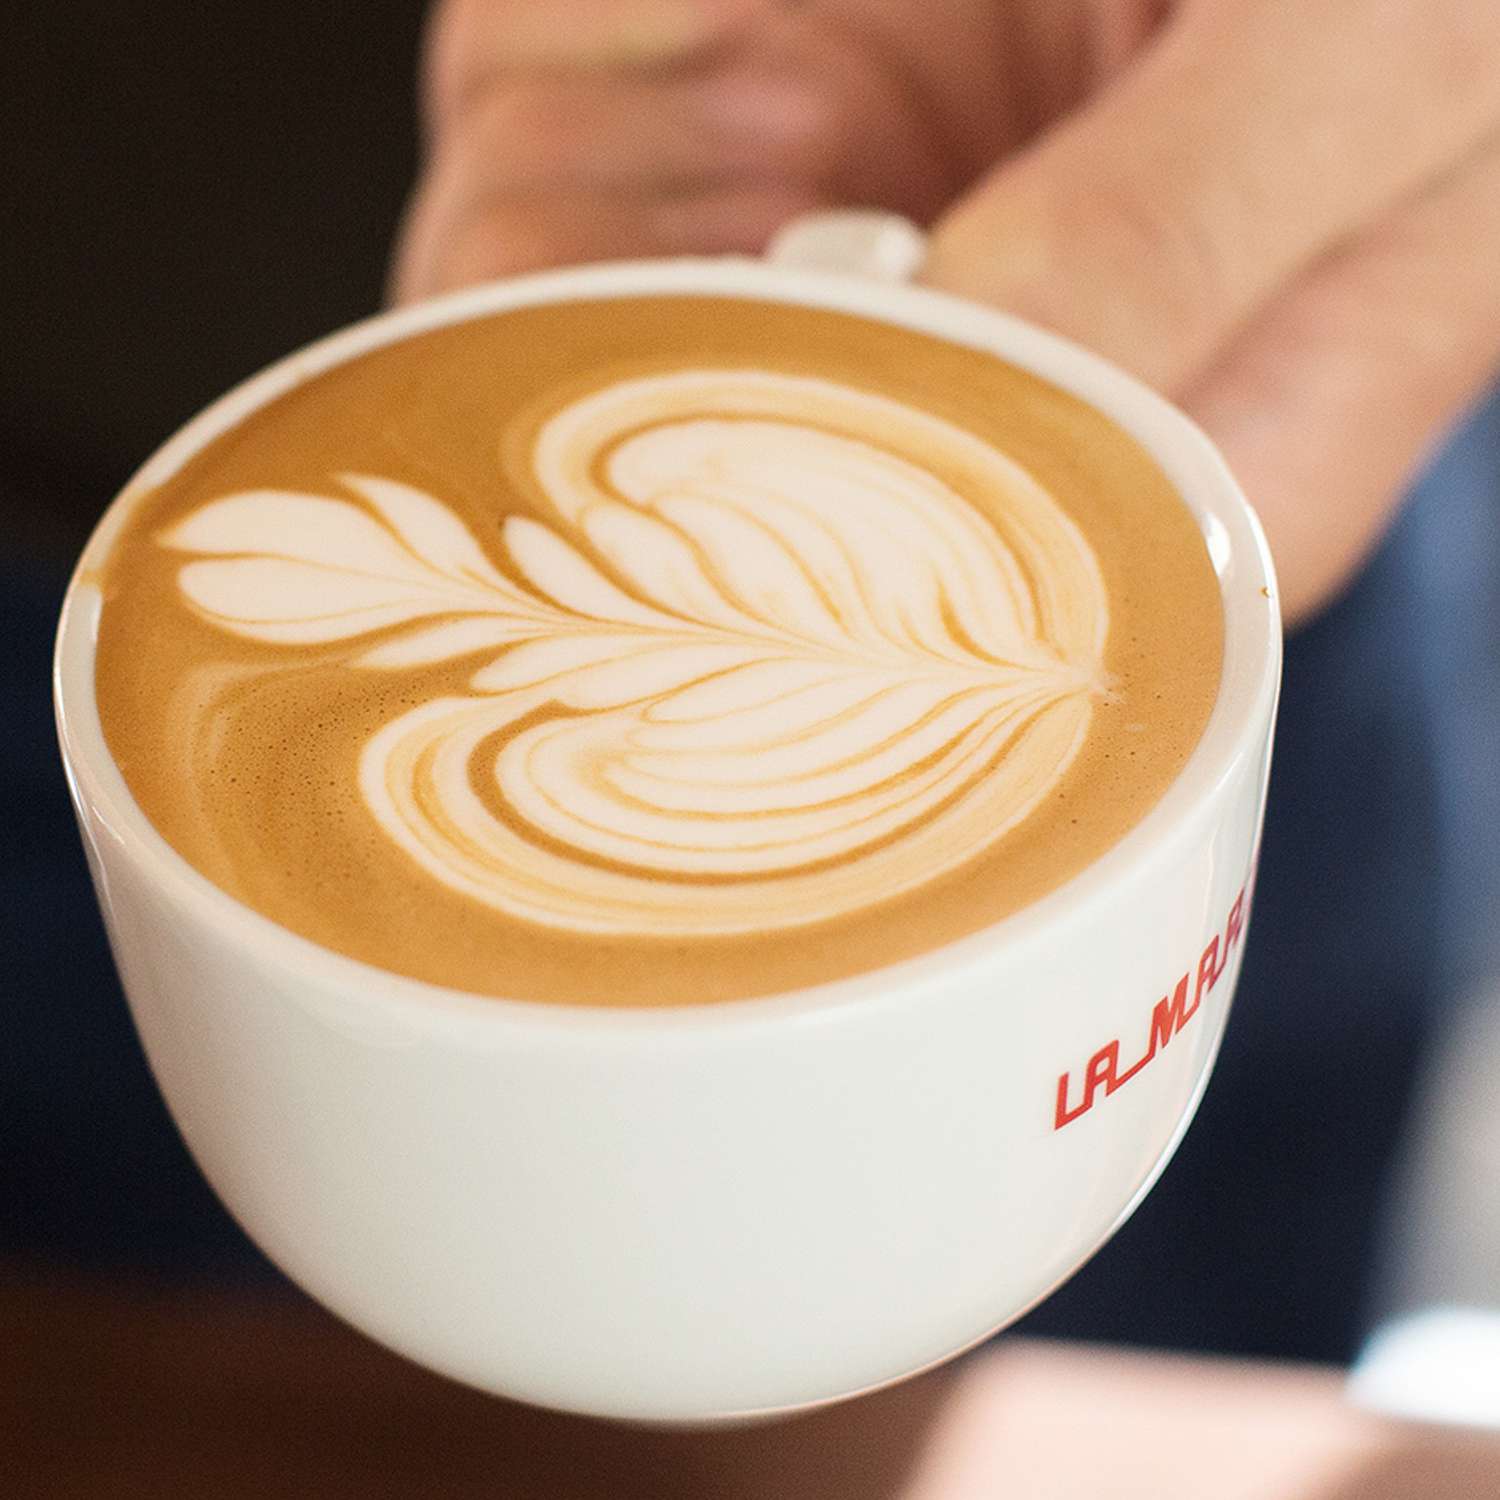 How to Make Barista Art on Coffee